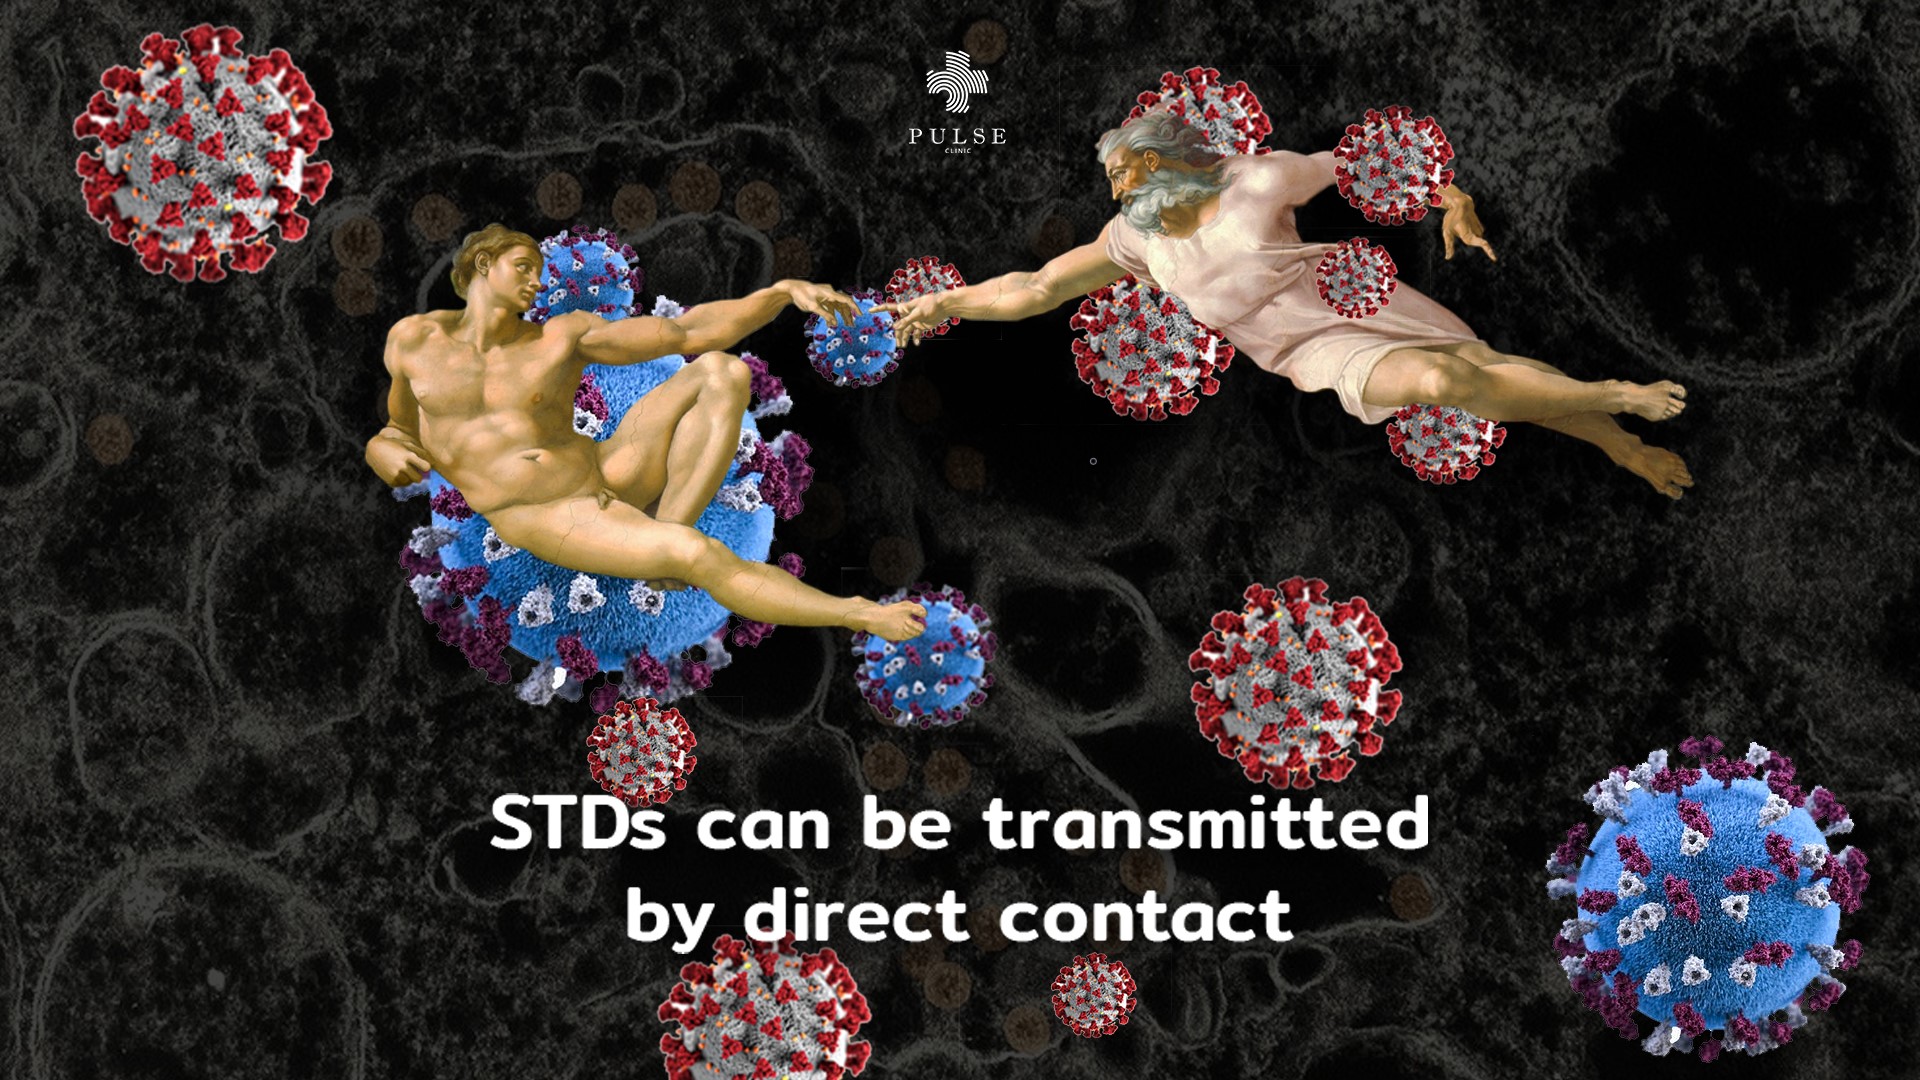 Can Sexually Transmitted Infections Spread By Skin Contact?